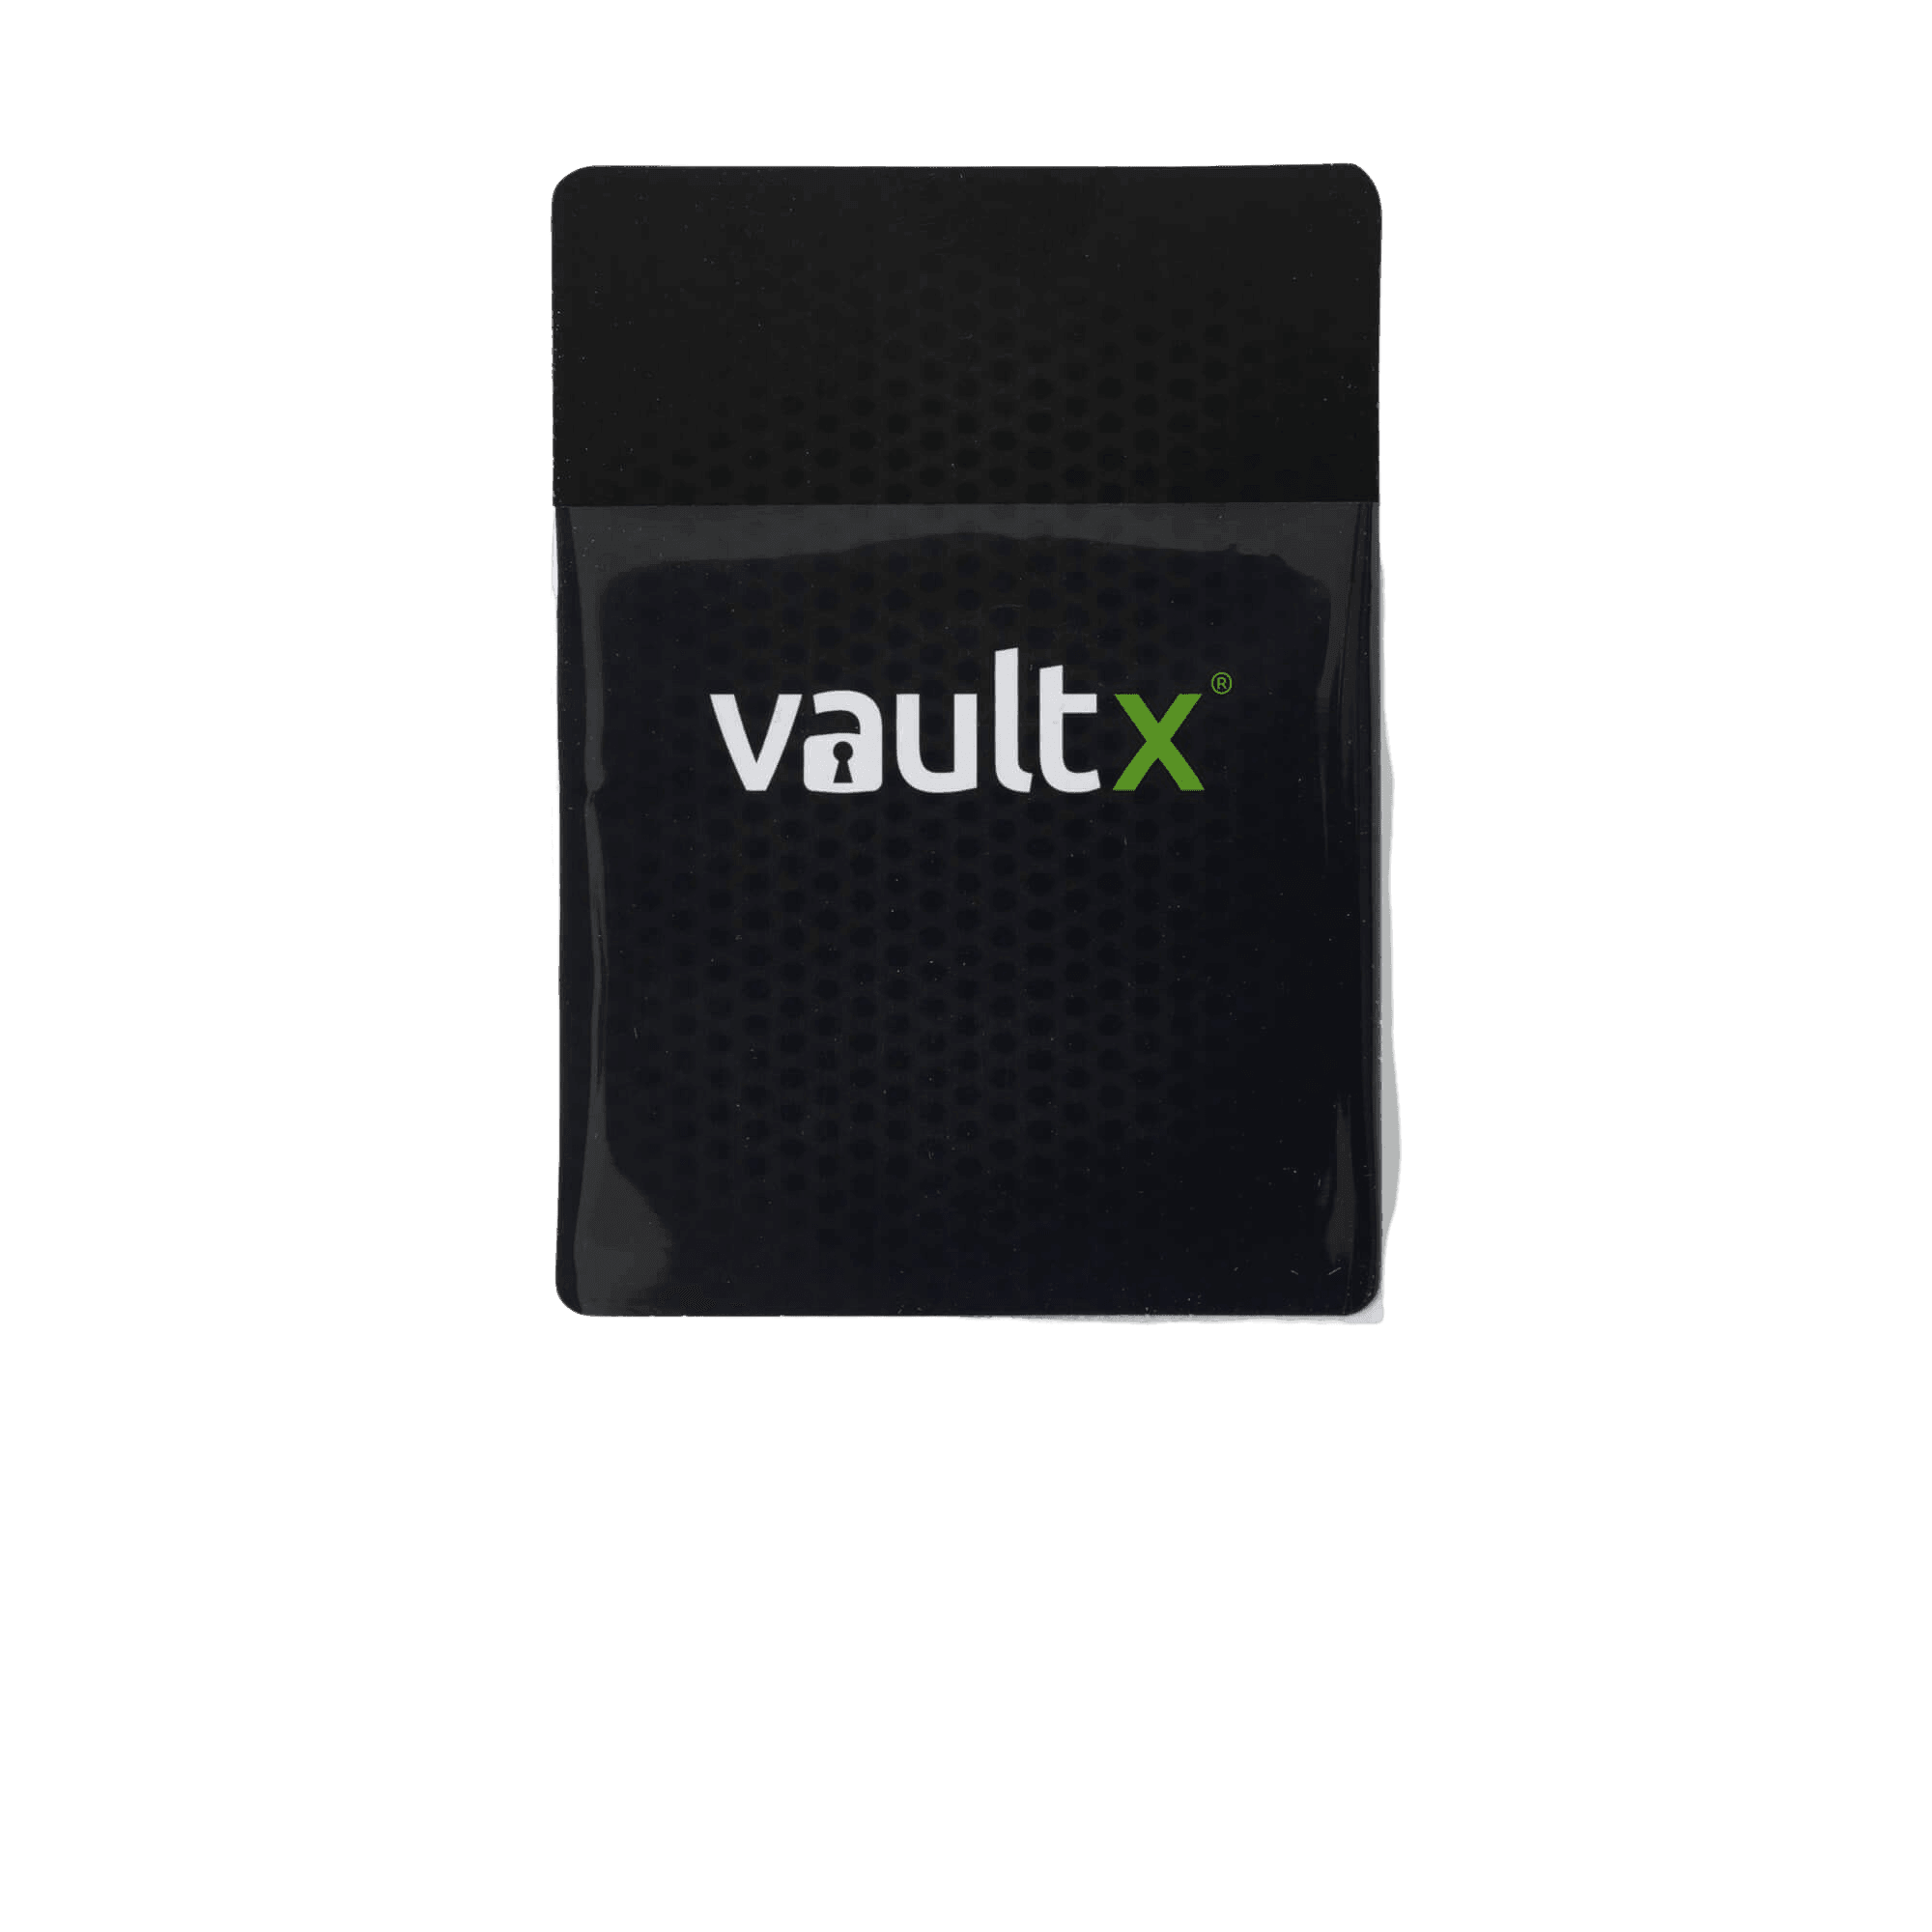 Vault X Card Sleeves for Thick Cards (200 Pack) - The Card Vault